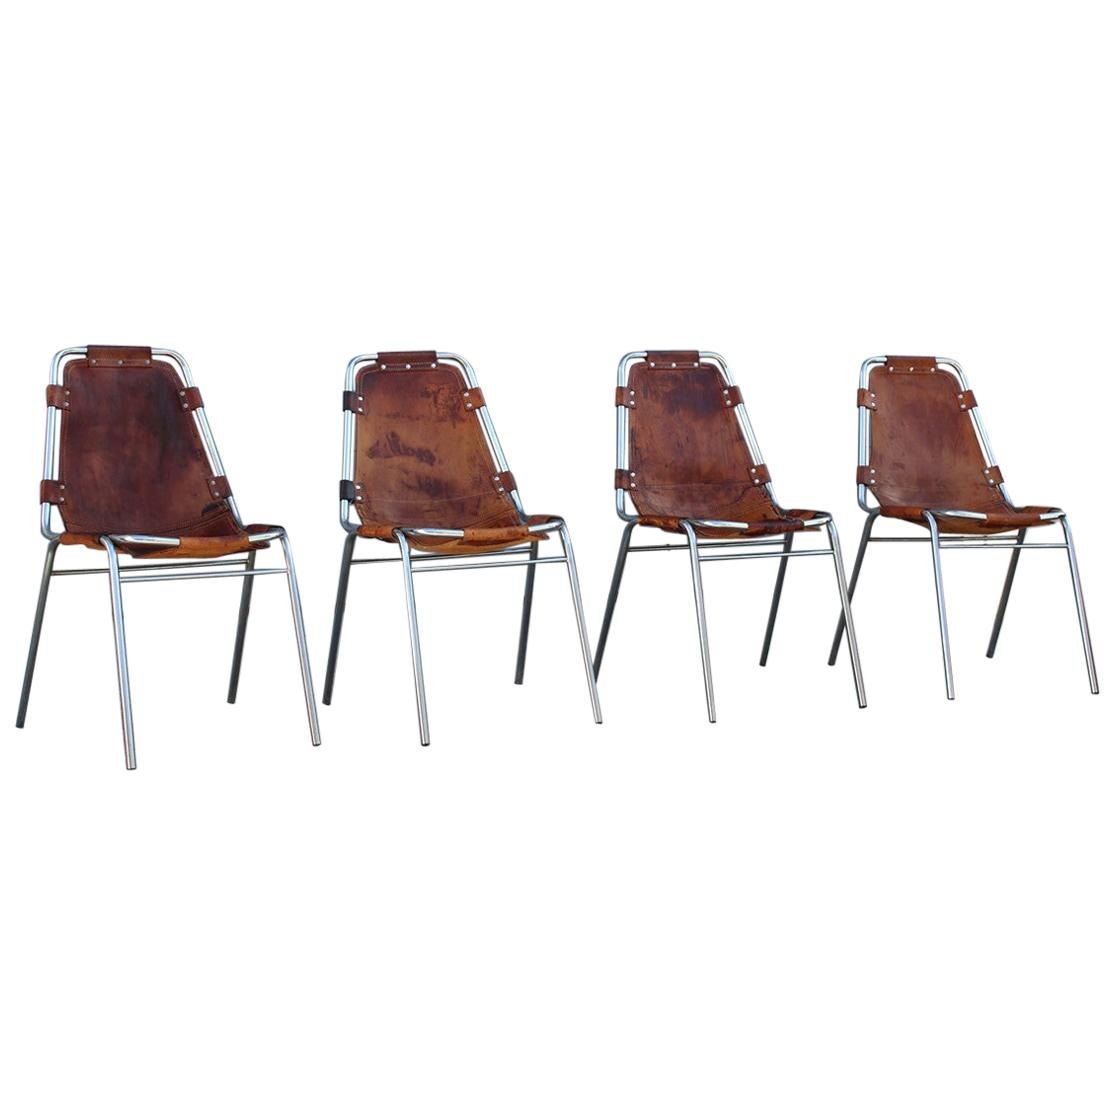 Chairs 'Les Arcs' Charlotte Perriand, 1970s Cognac Leather Chromed Metal, Italy